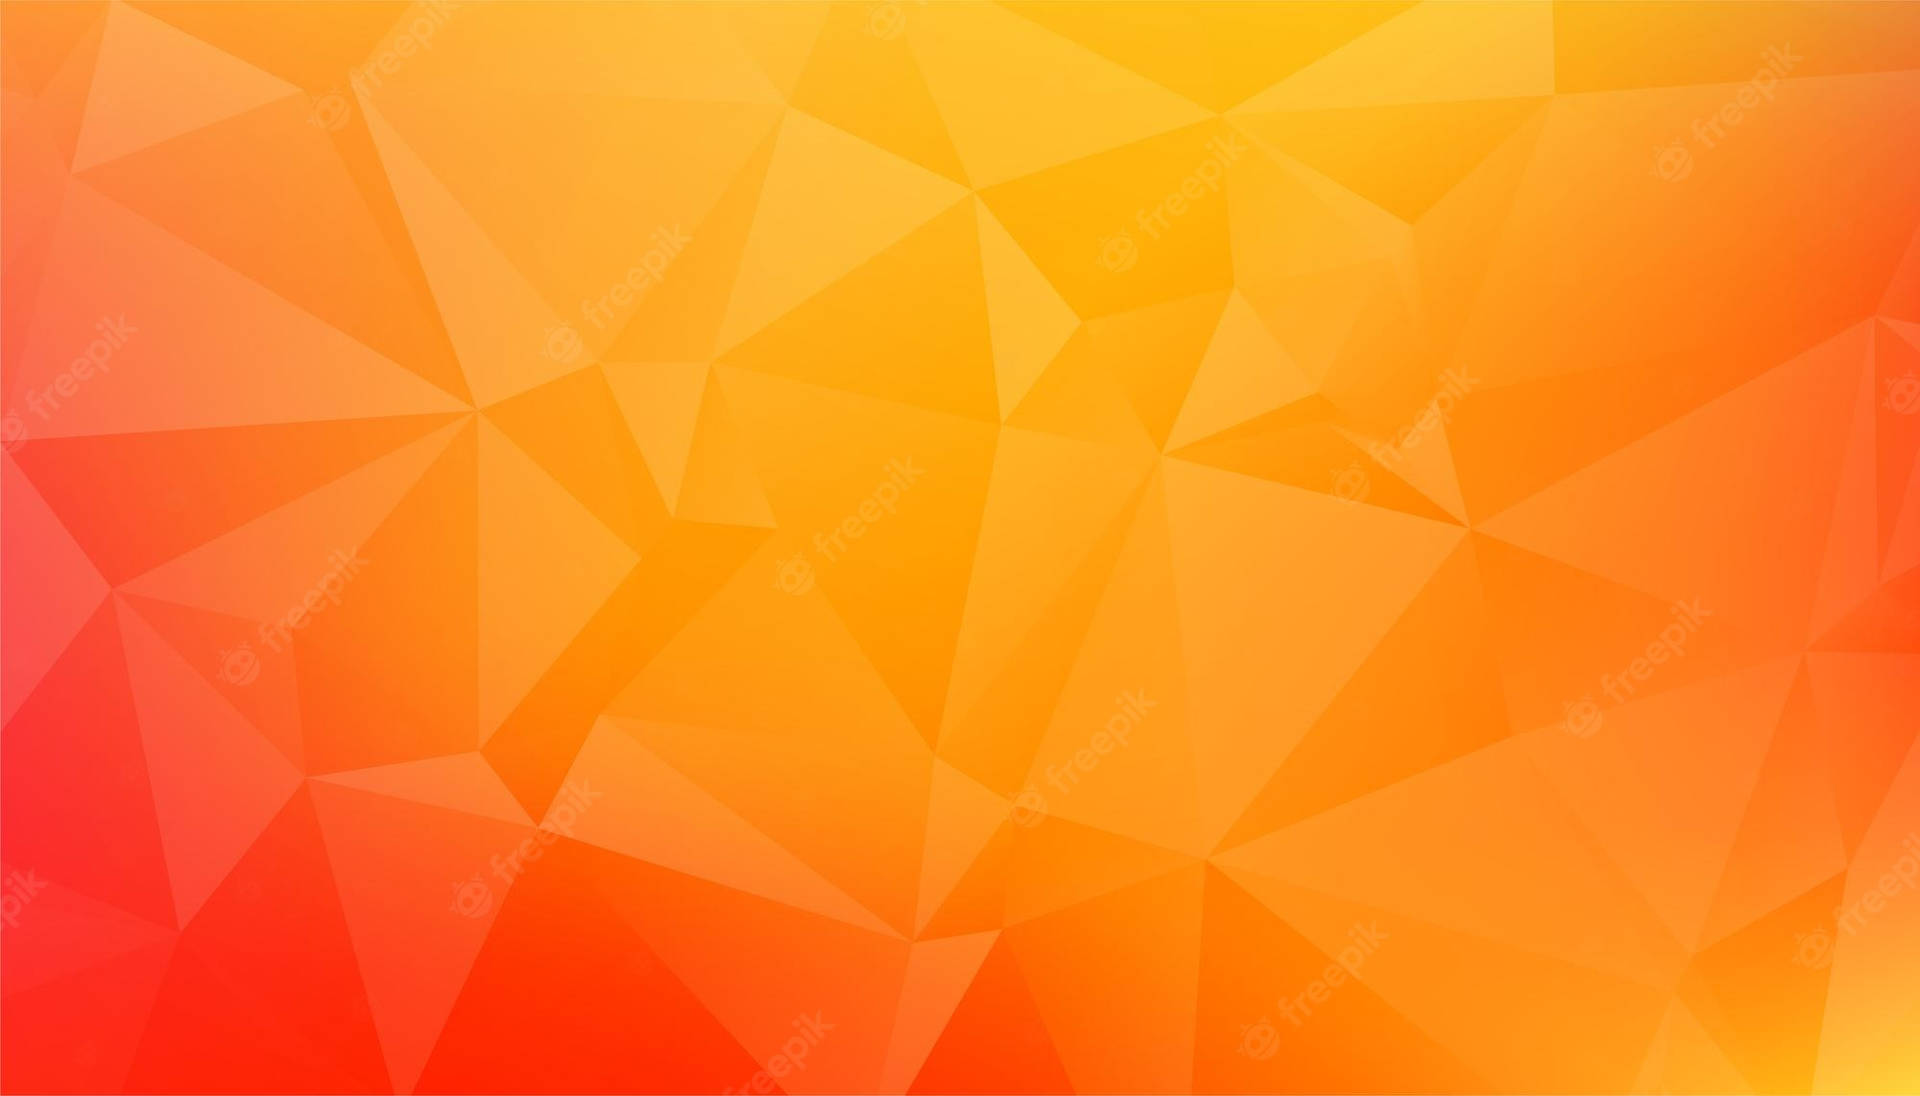 Orange And Yellow Abstract Background Wallpaper